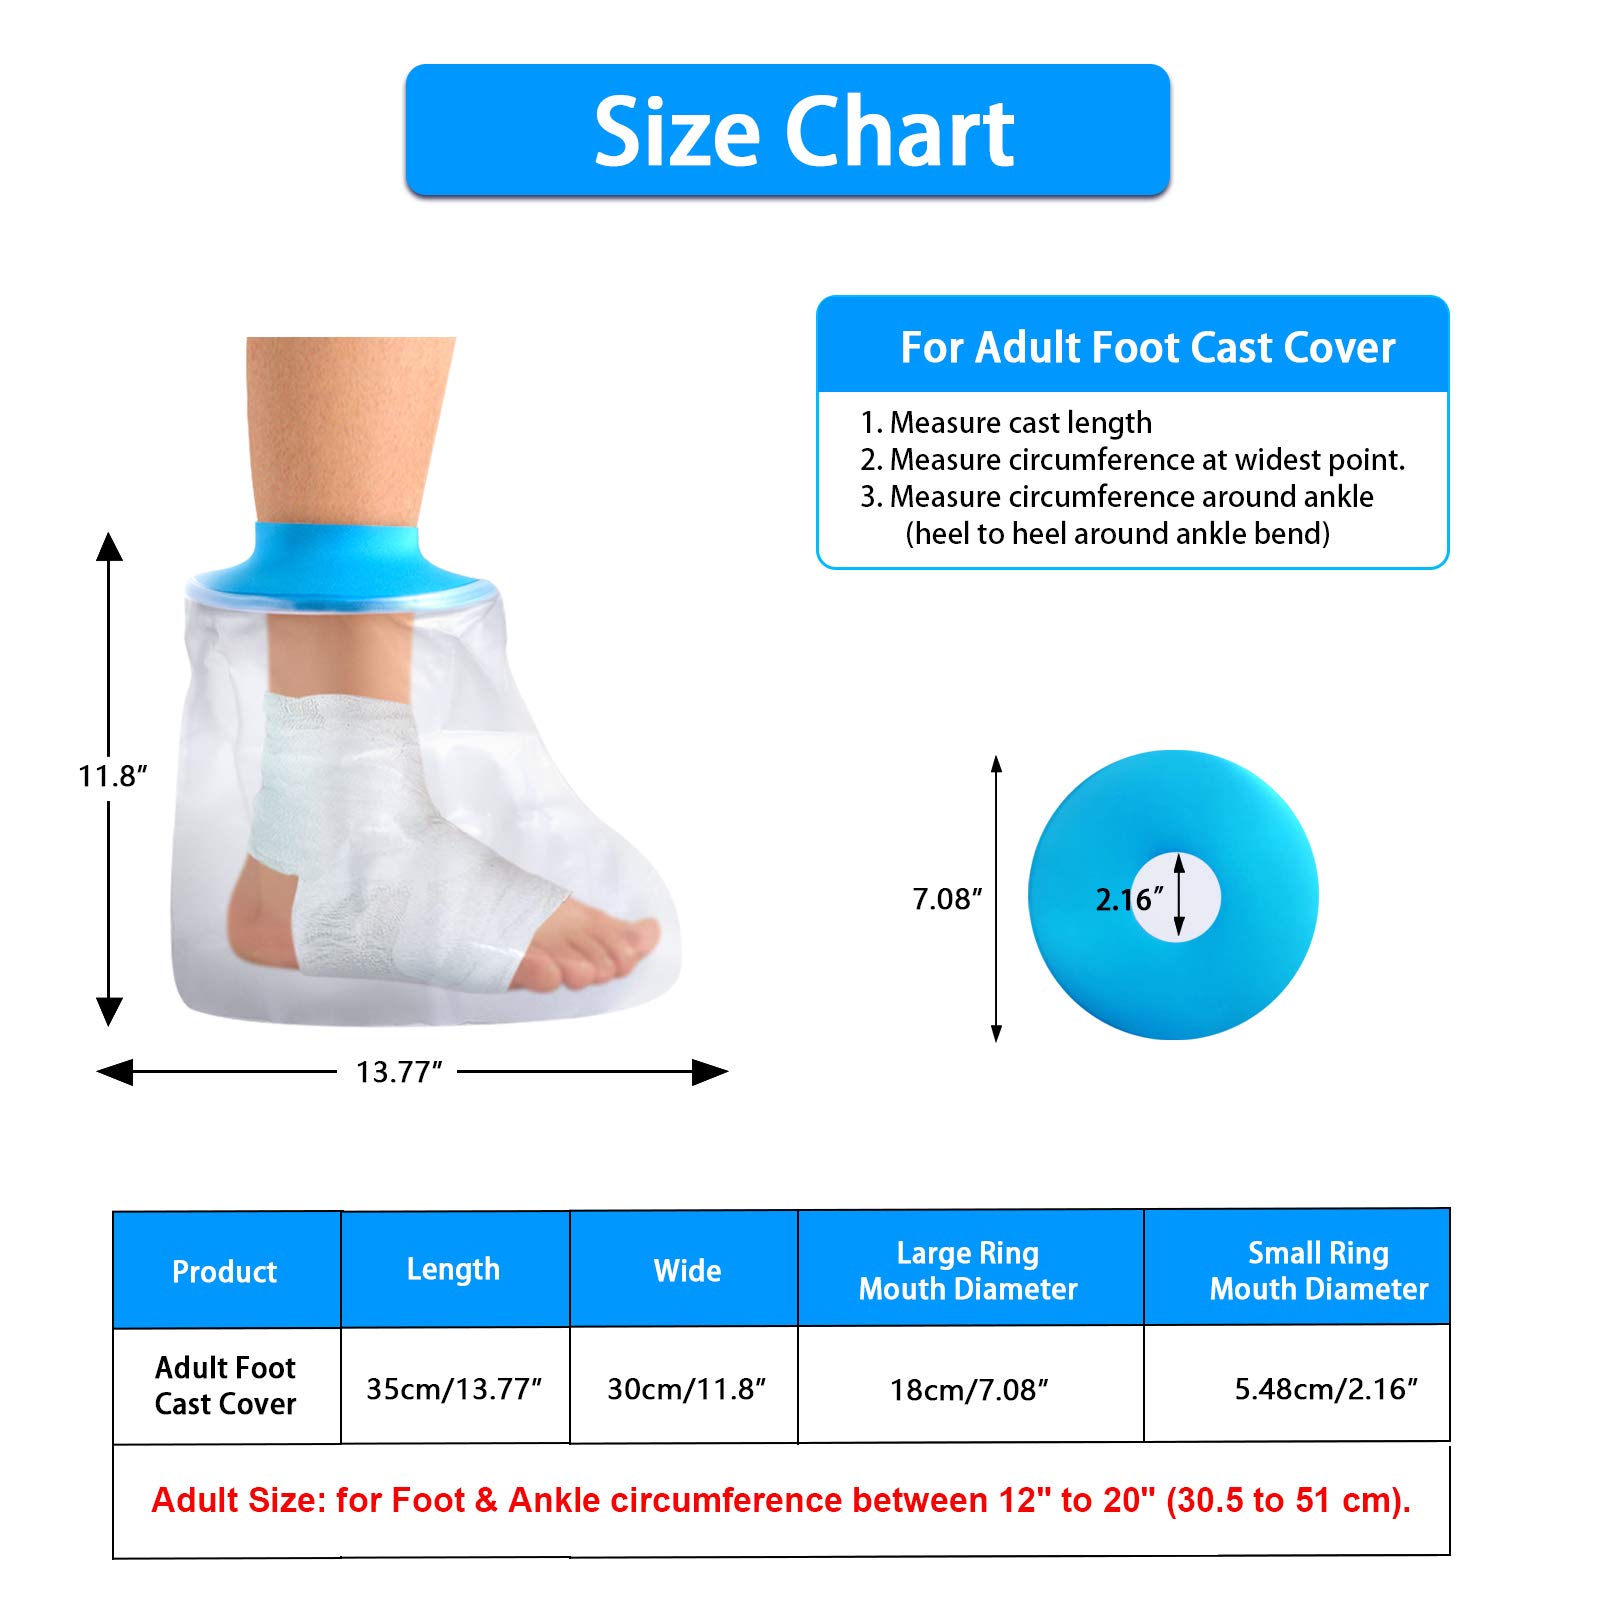 Cast Covers for Shower Adult Foot, Waterproof Foot Cast Wound Cover Protector for Shower Bath,Soft Comfortable Watertight Seal to Keep Wounds Dry, for Showering, Bathing and Hot-tub(Adult Foot)